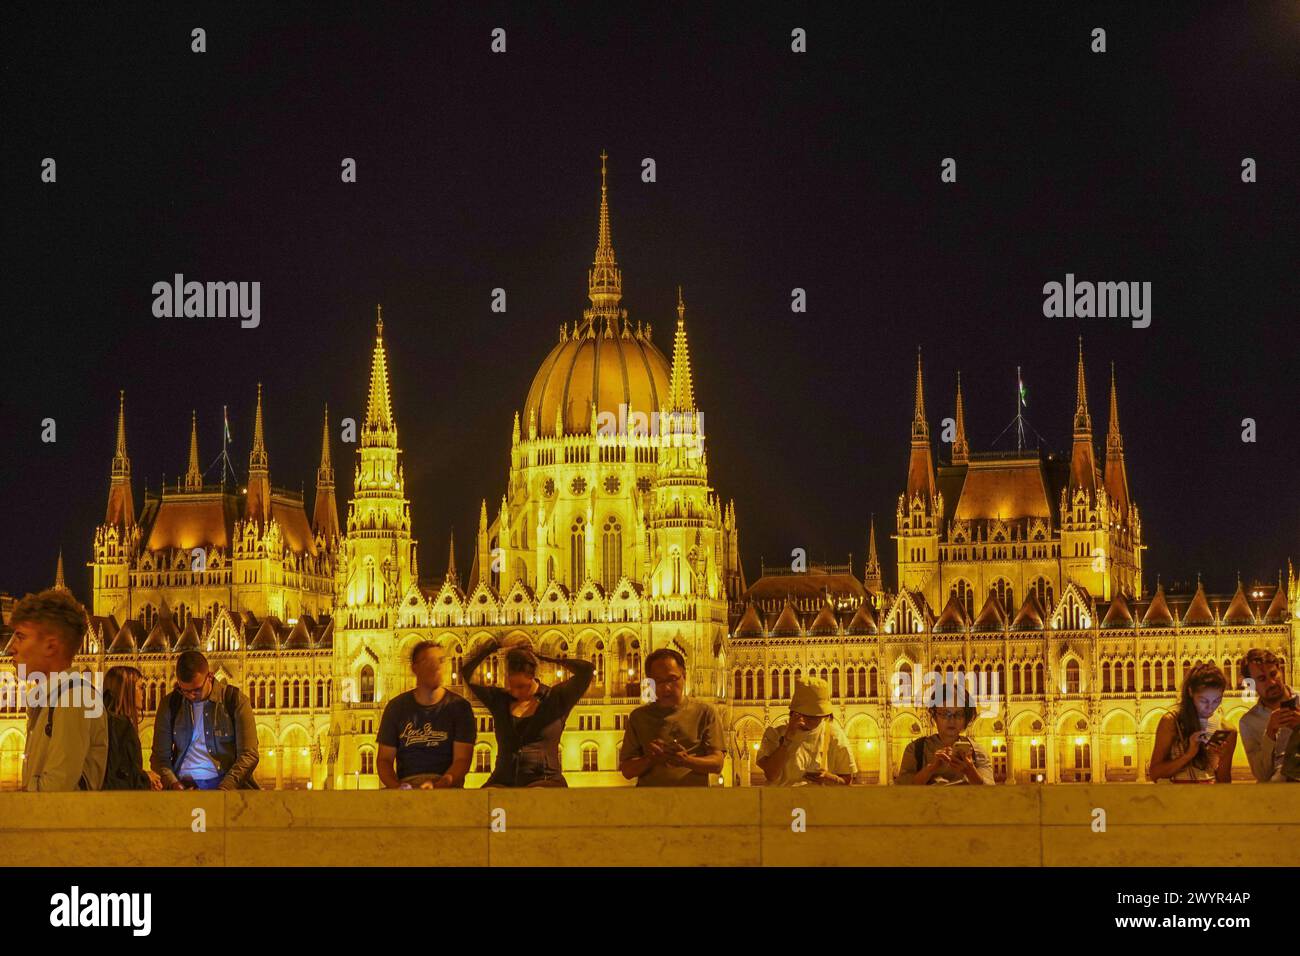 Hungary, Budapest, Night view of the Neo-Gothic Hungarian Parliament building The Hungarian Parliament Building also known as the Parliament of Budape Stock Photo